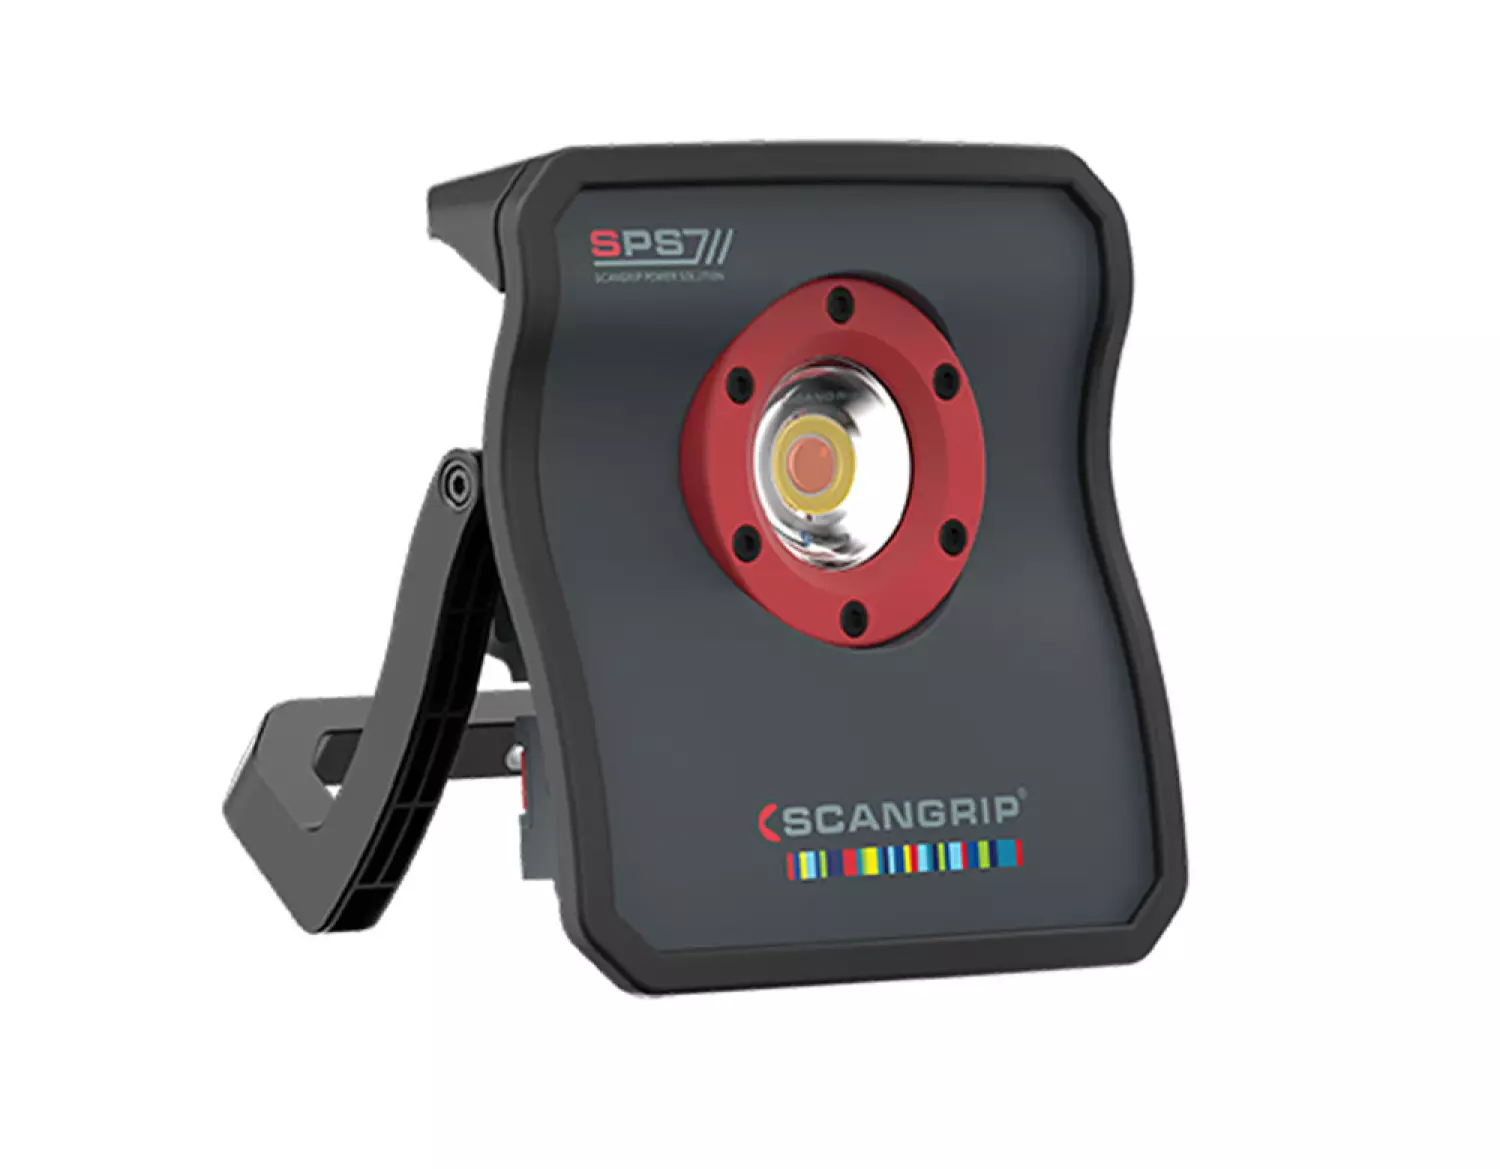 Scangrip Multimatch 3 SPS Bouwlamp - Rechargeable - Dimmable - 3.000Lm-image